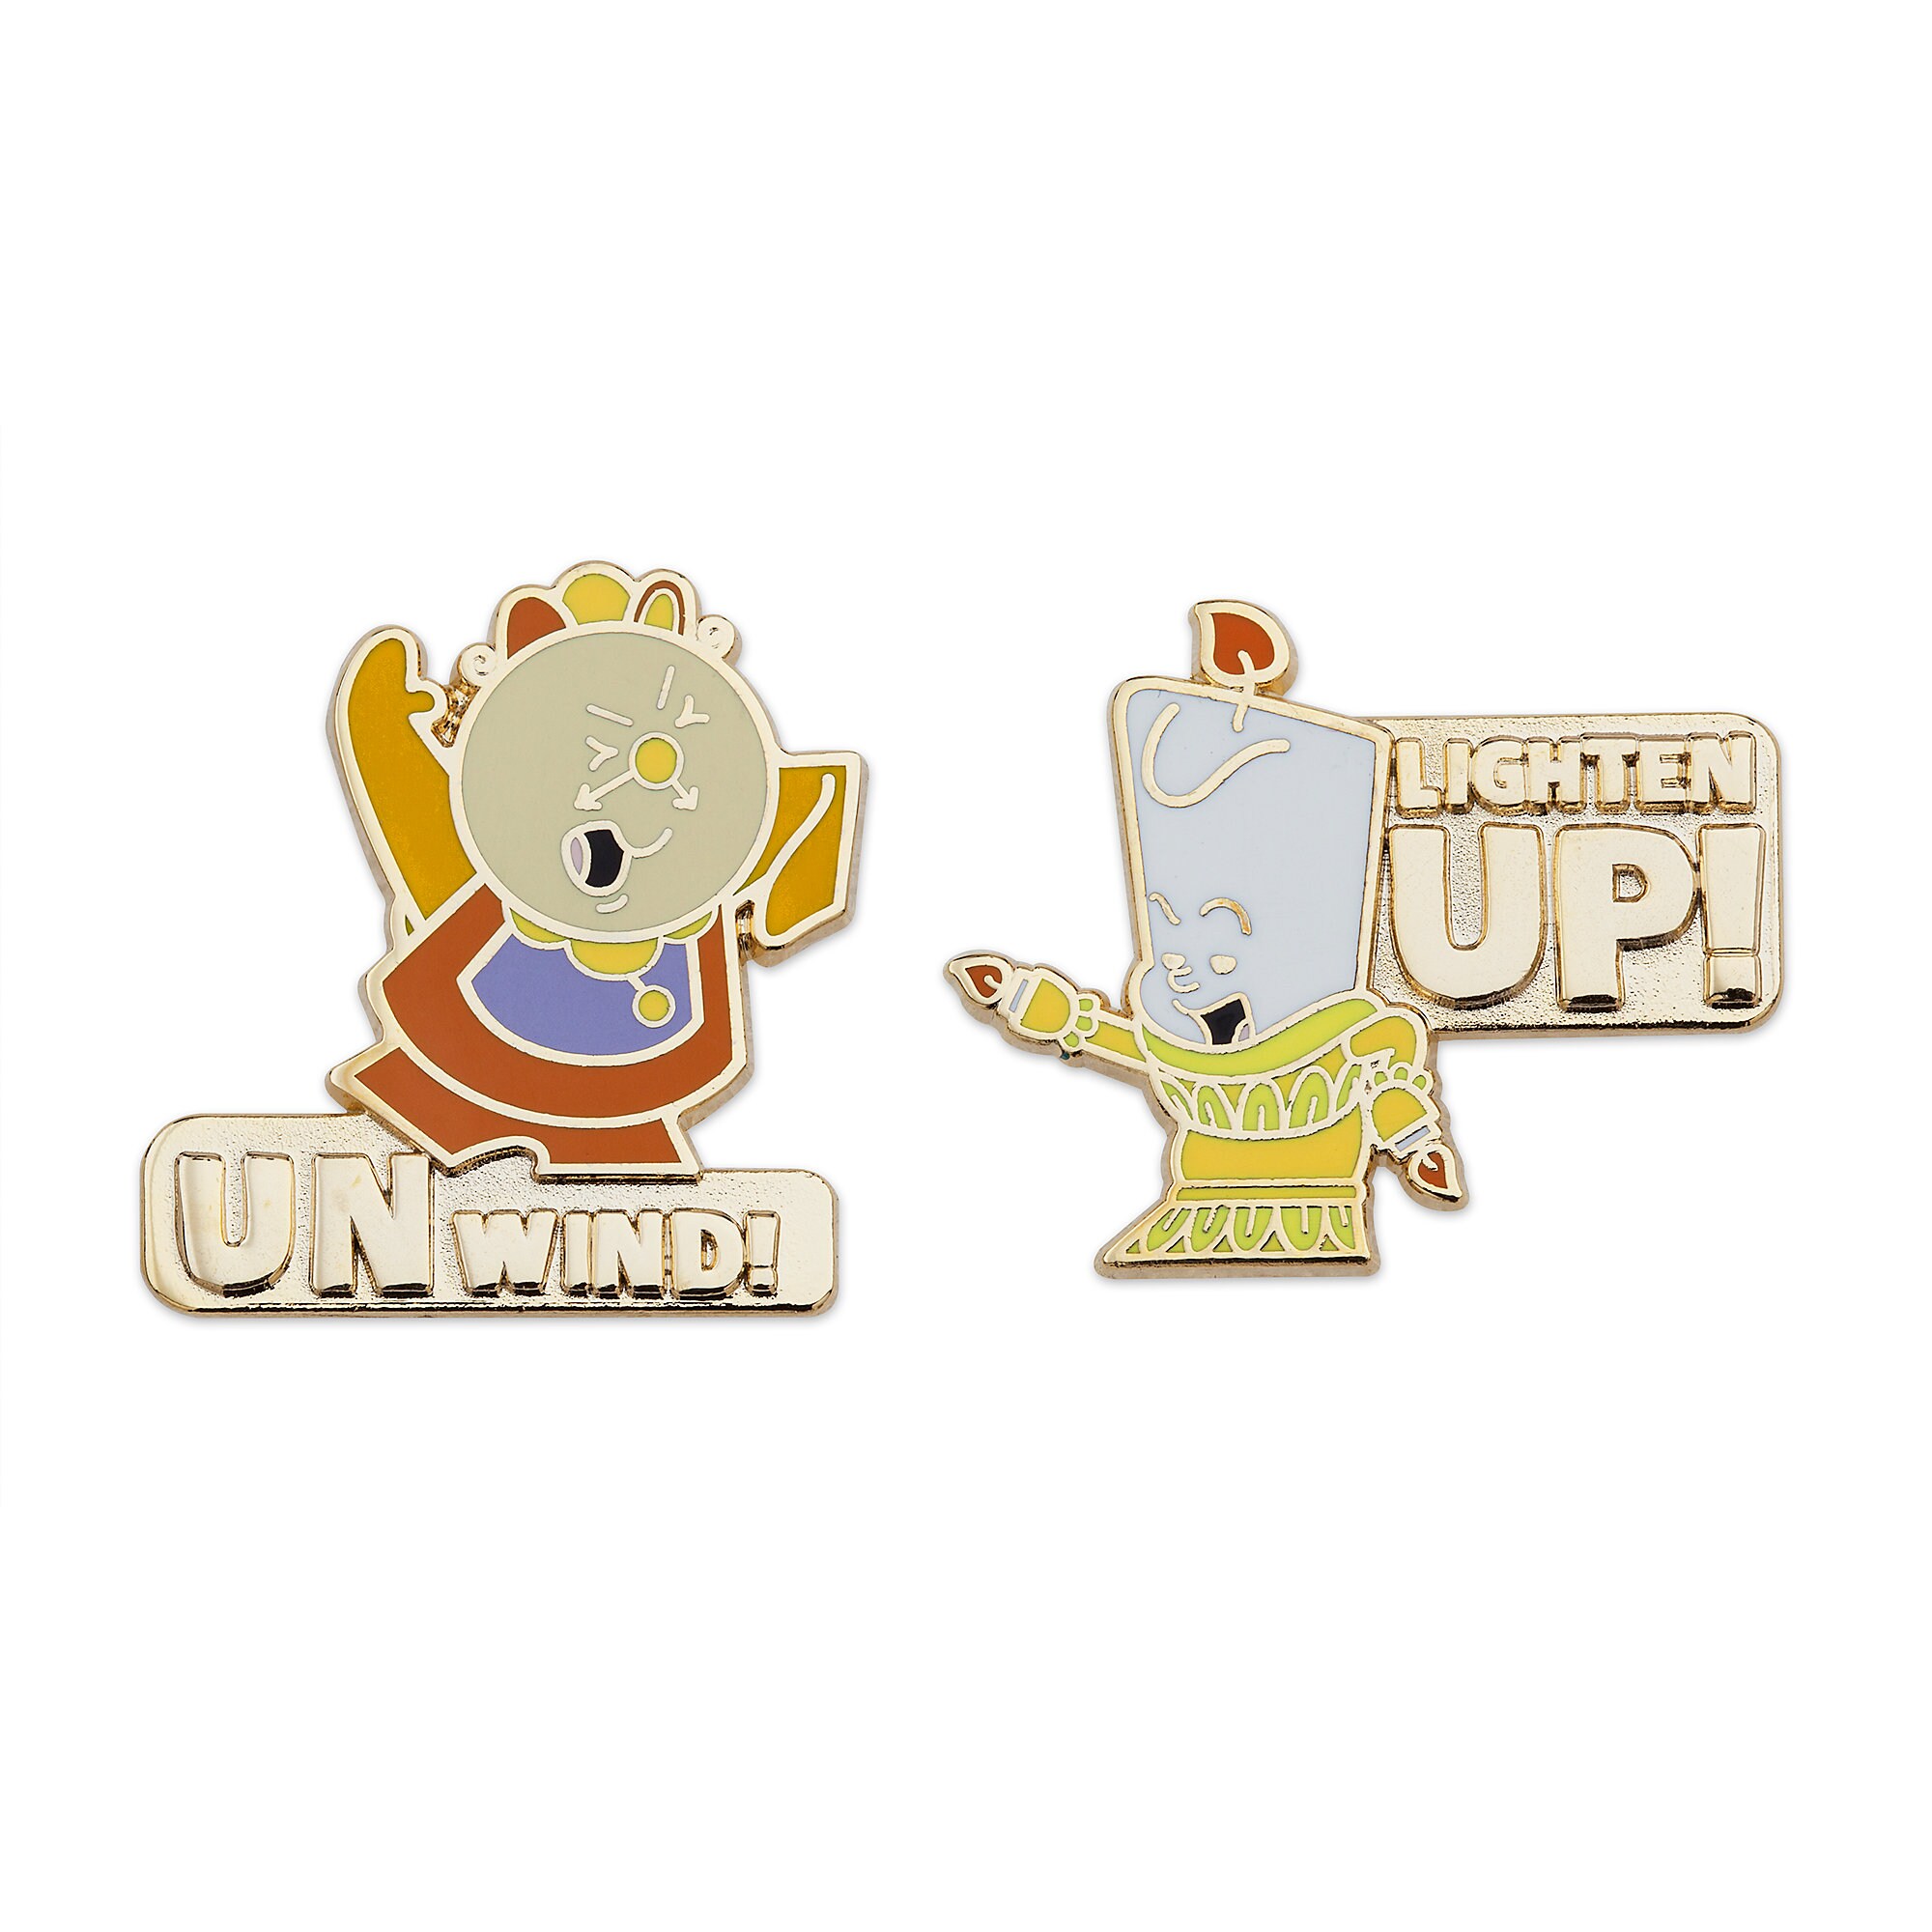 Cogsworth and Lumiere Pin Set - Beauty and the Beast